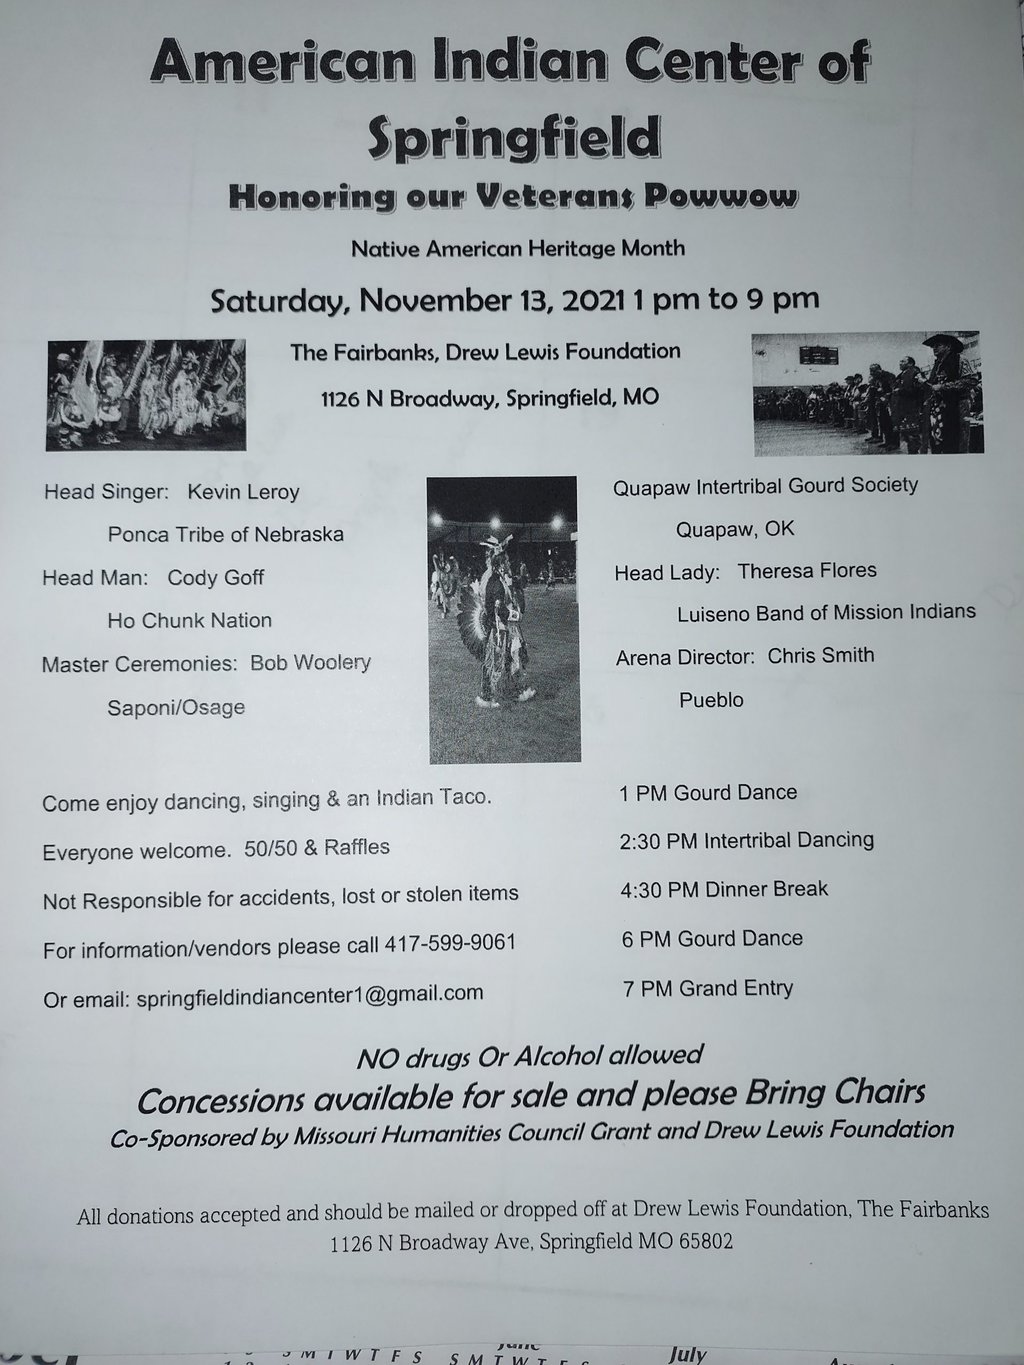 American Indian Center of Springfield Honoring our Veterans Pow Wow 2021